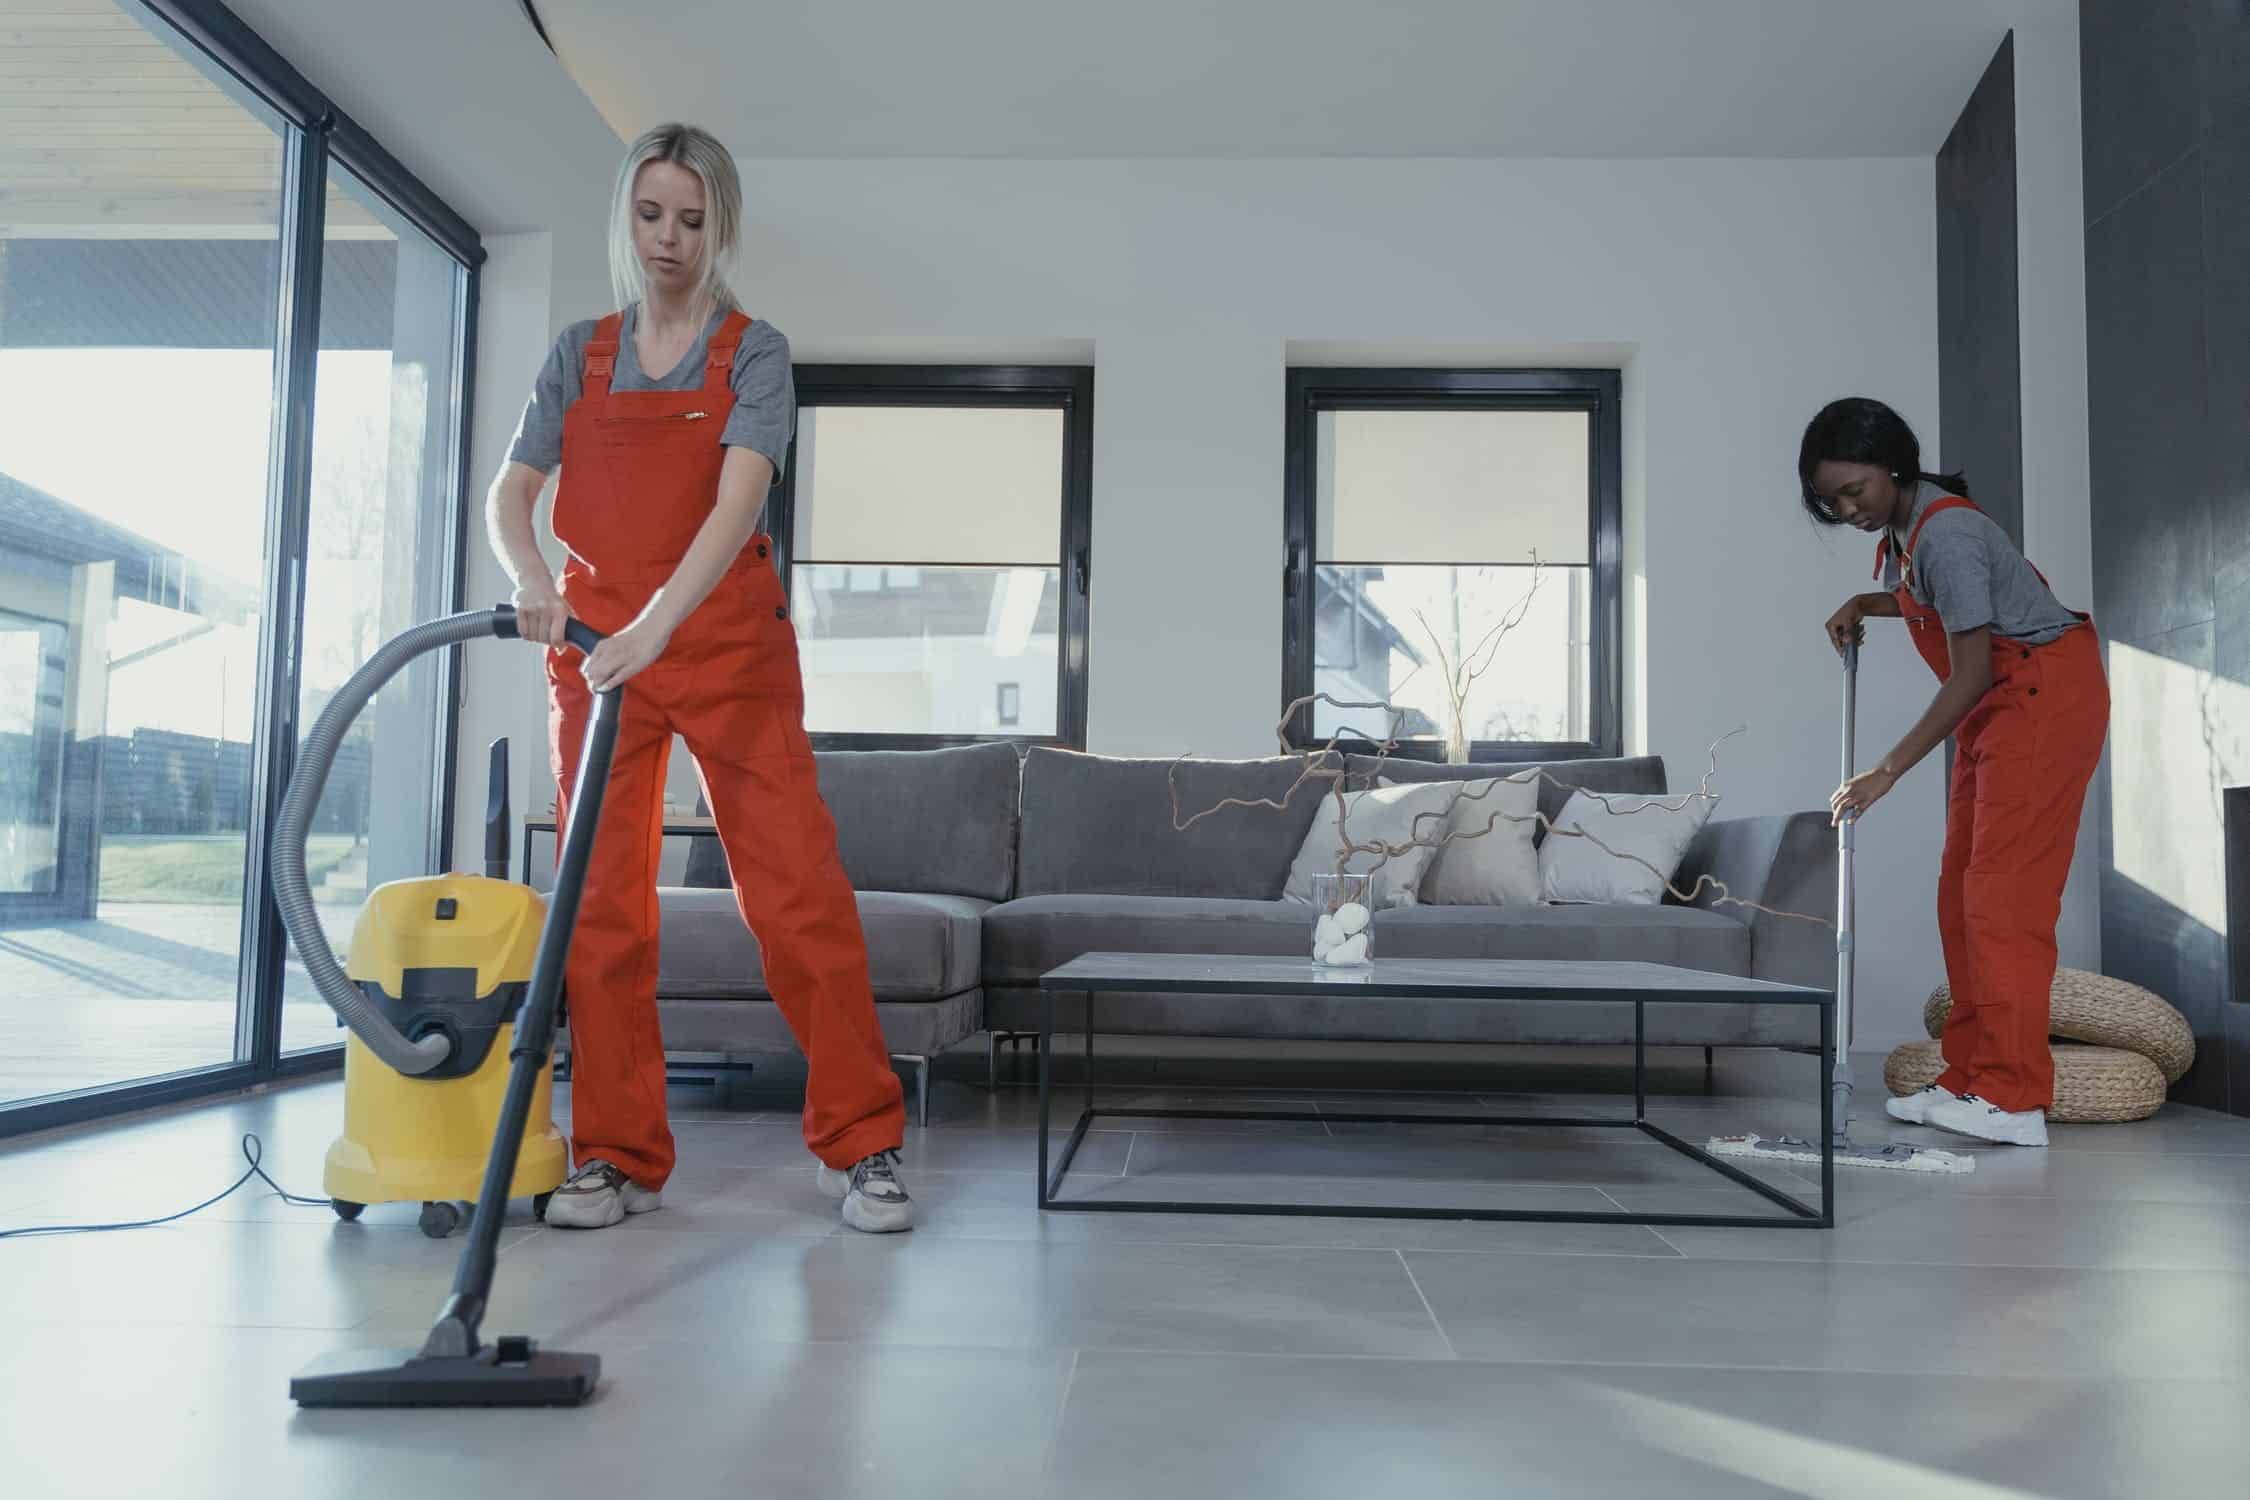 Housekeeping Services: What you can expect from your housekeeper